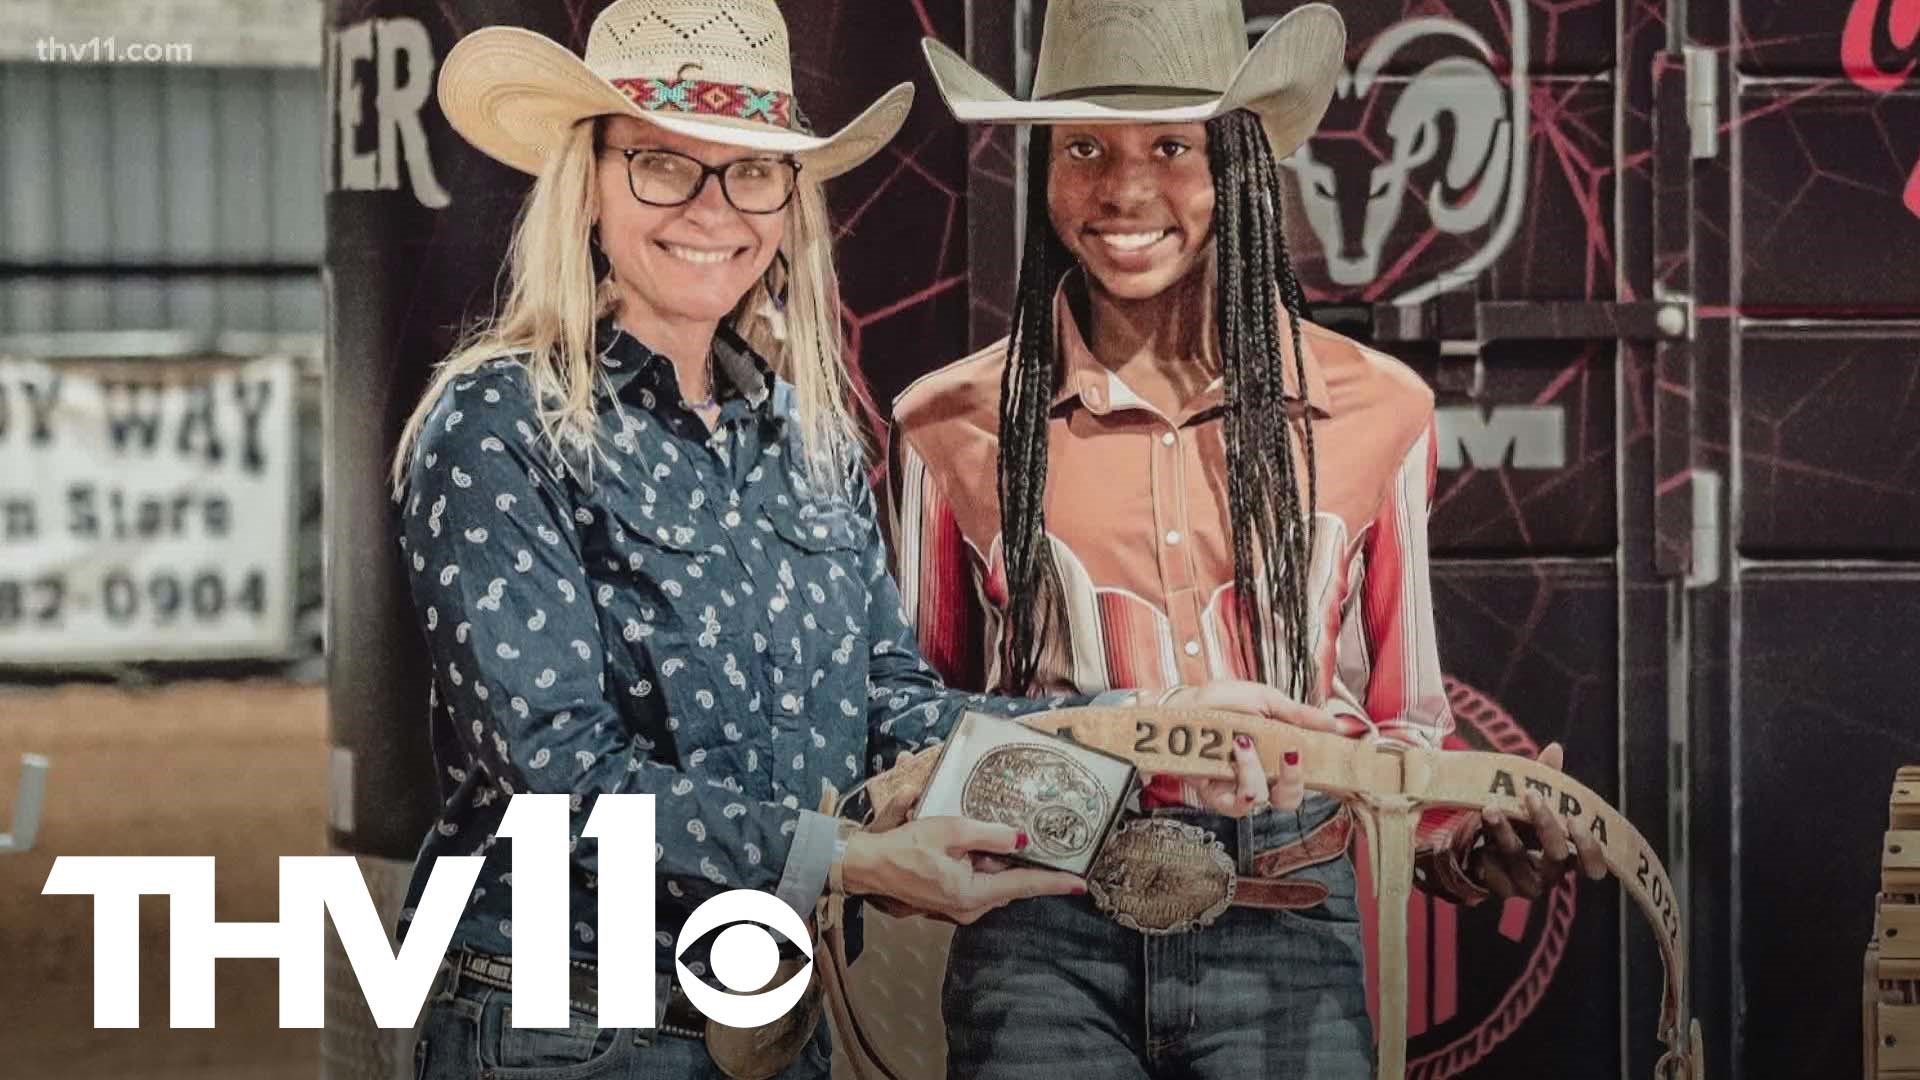 Down at Wofford Ranch in Vilonia is 13-year-old Paris Wilburd, a Black barrel racer making a big-time name for herself at rodeos both in and out of the state.